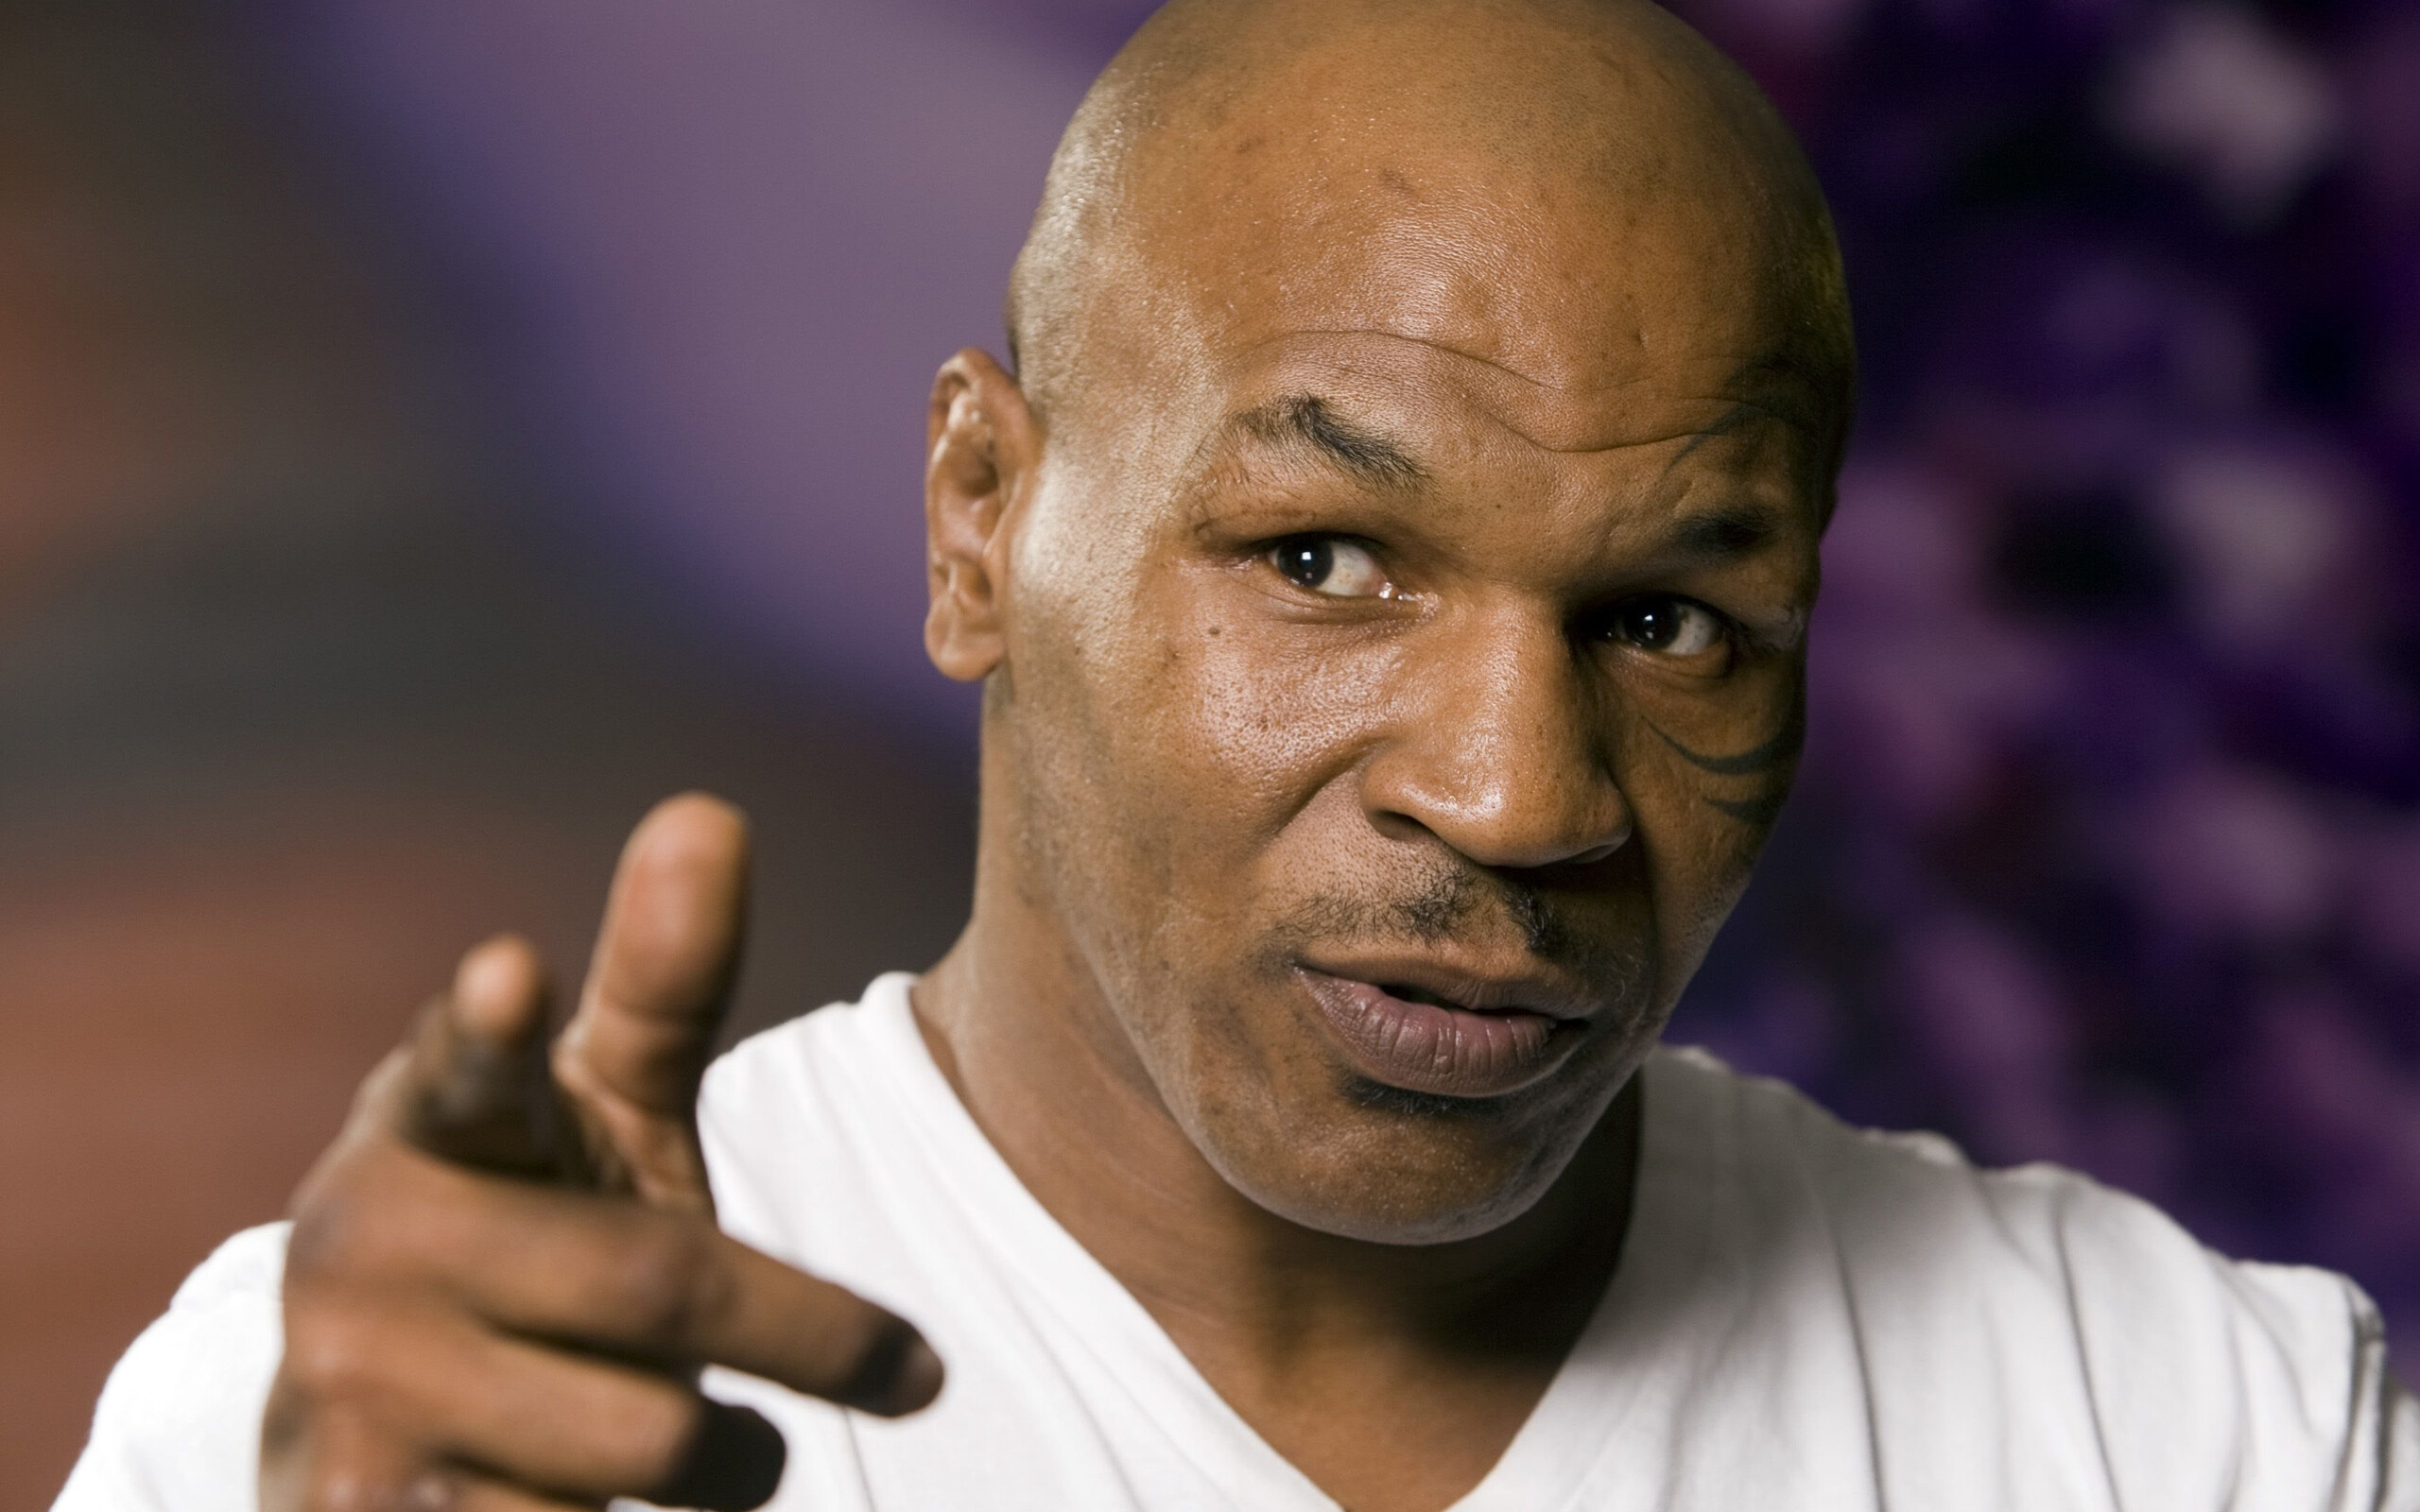 Mike Tyson: American boxer, He made his professional heavyweight debut as an 18-year-old on March 6, 1985. 2560x1600 HD Wallpaper.